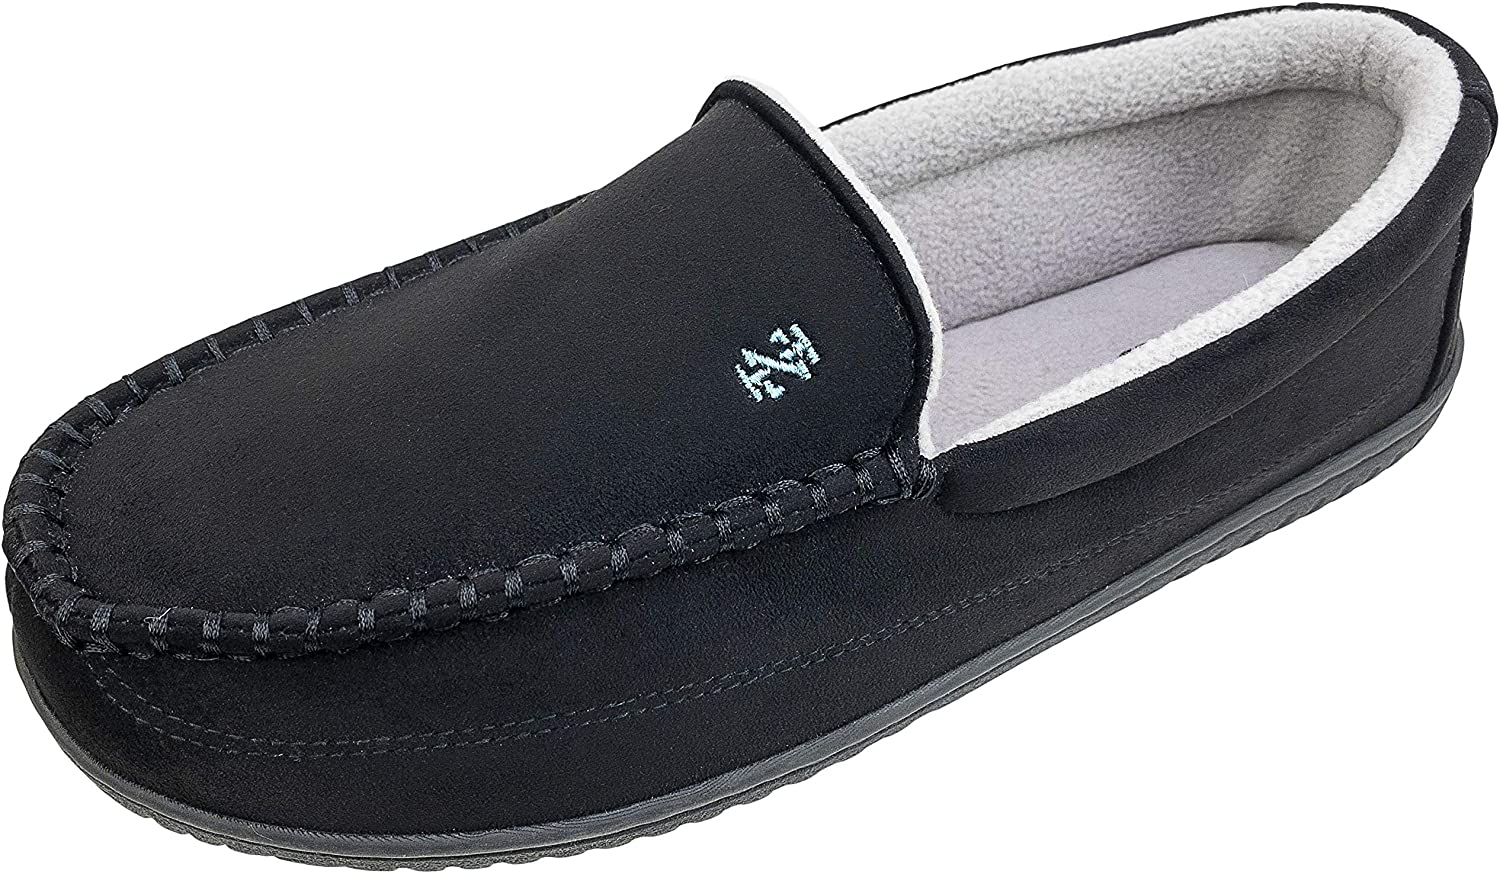 Classic Slip on Clogs with Memory Foam,Winter Warm Slippers Size 8 to 13 IZOD Mens Slippers